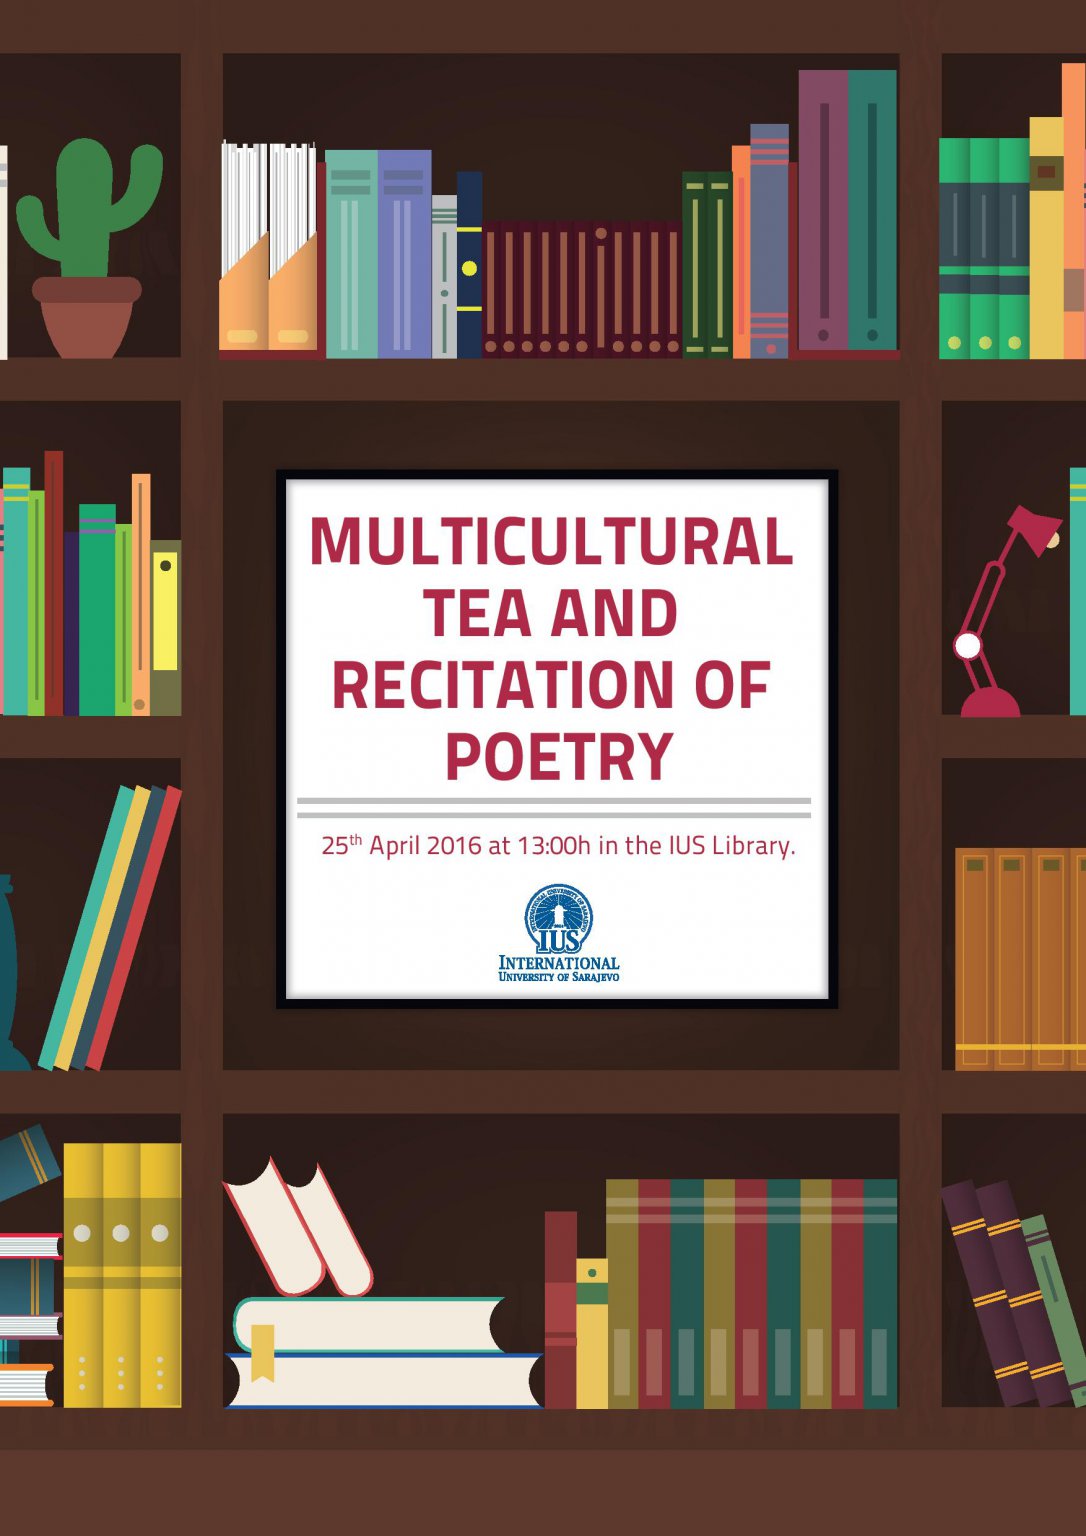  Multicultural tea and recitation of poetry 